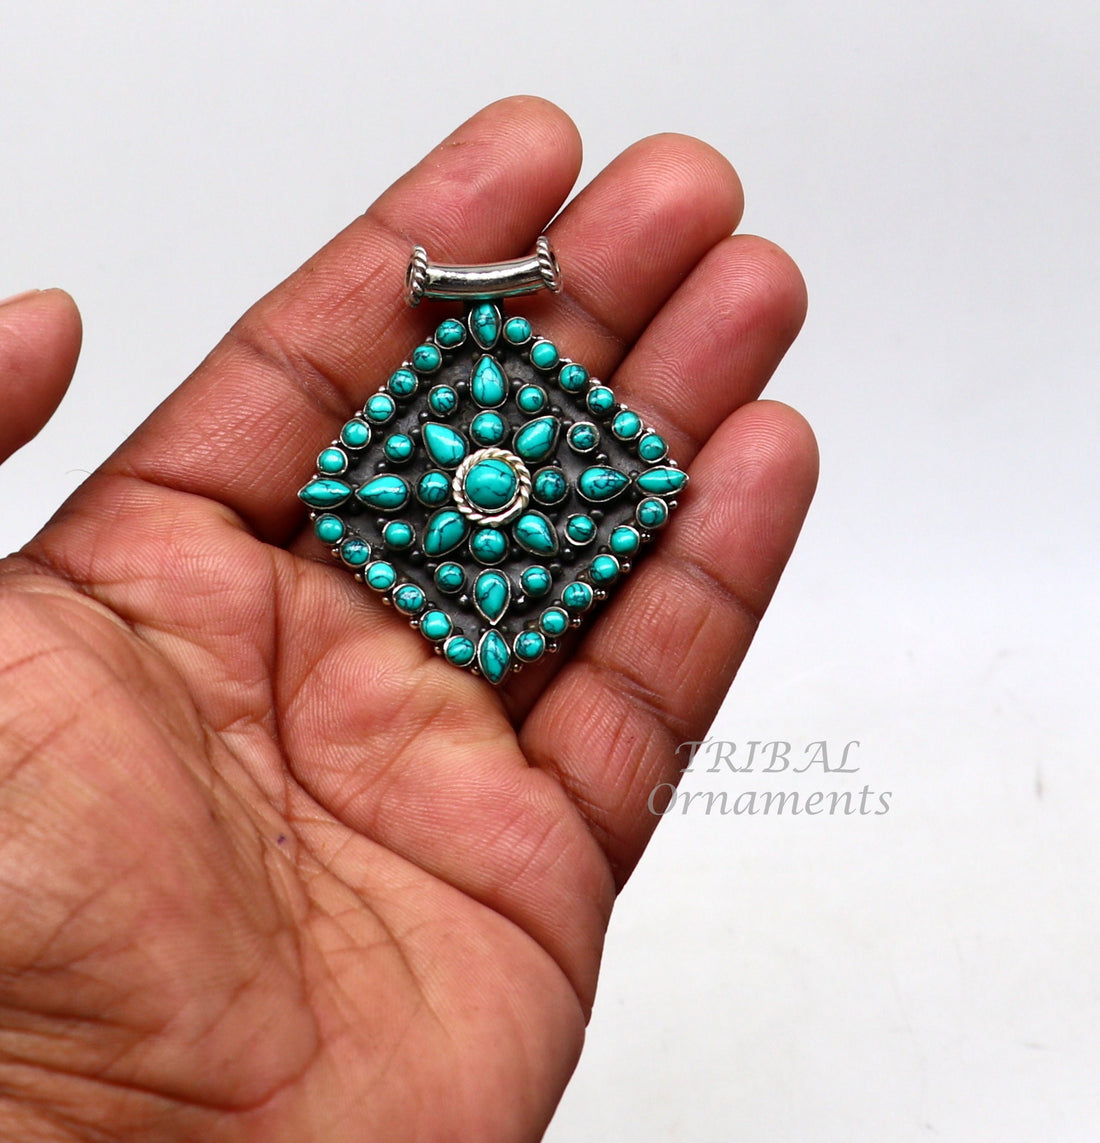 Vintage antique design handmade 925 sterling silver fabulous turquoise stone pendant wedding women's ethnic tribal jewelry nsp527 - TRIBAL ORNAMENTS